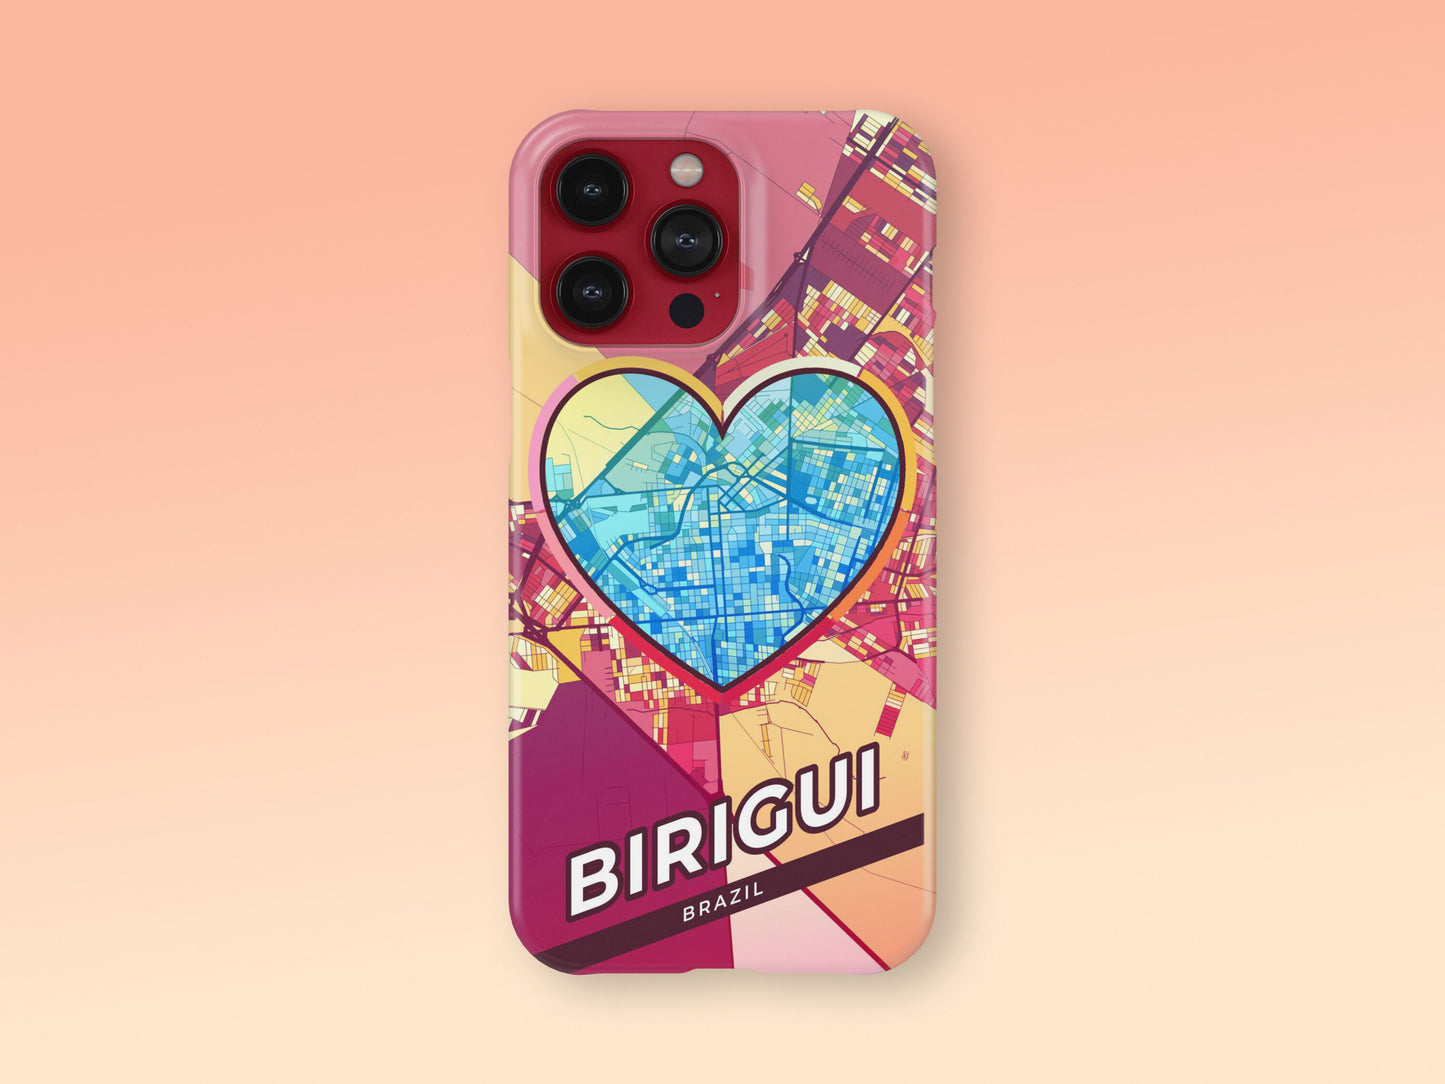 Birigui Brazil slim phone case with colorful icon. Birthday, wedding or housewarming gift. Couple match cases. 2